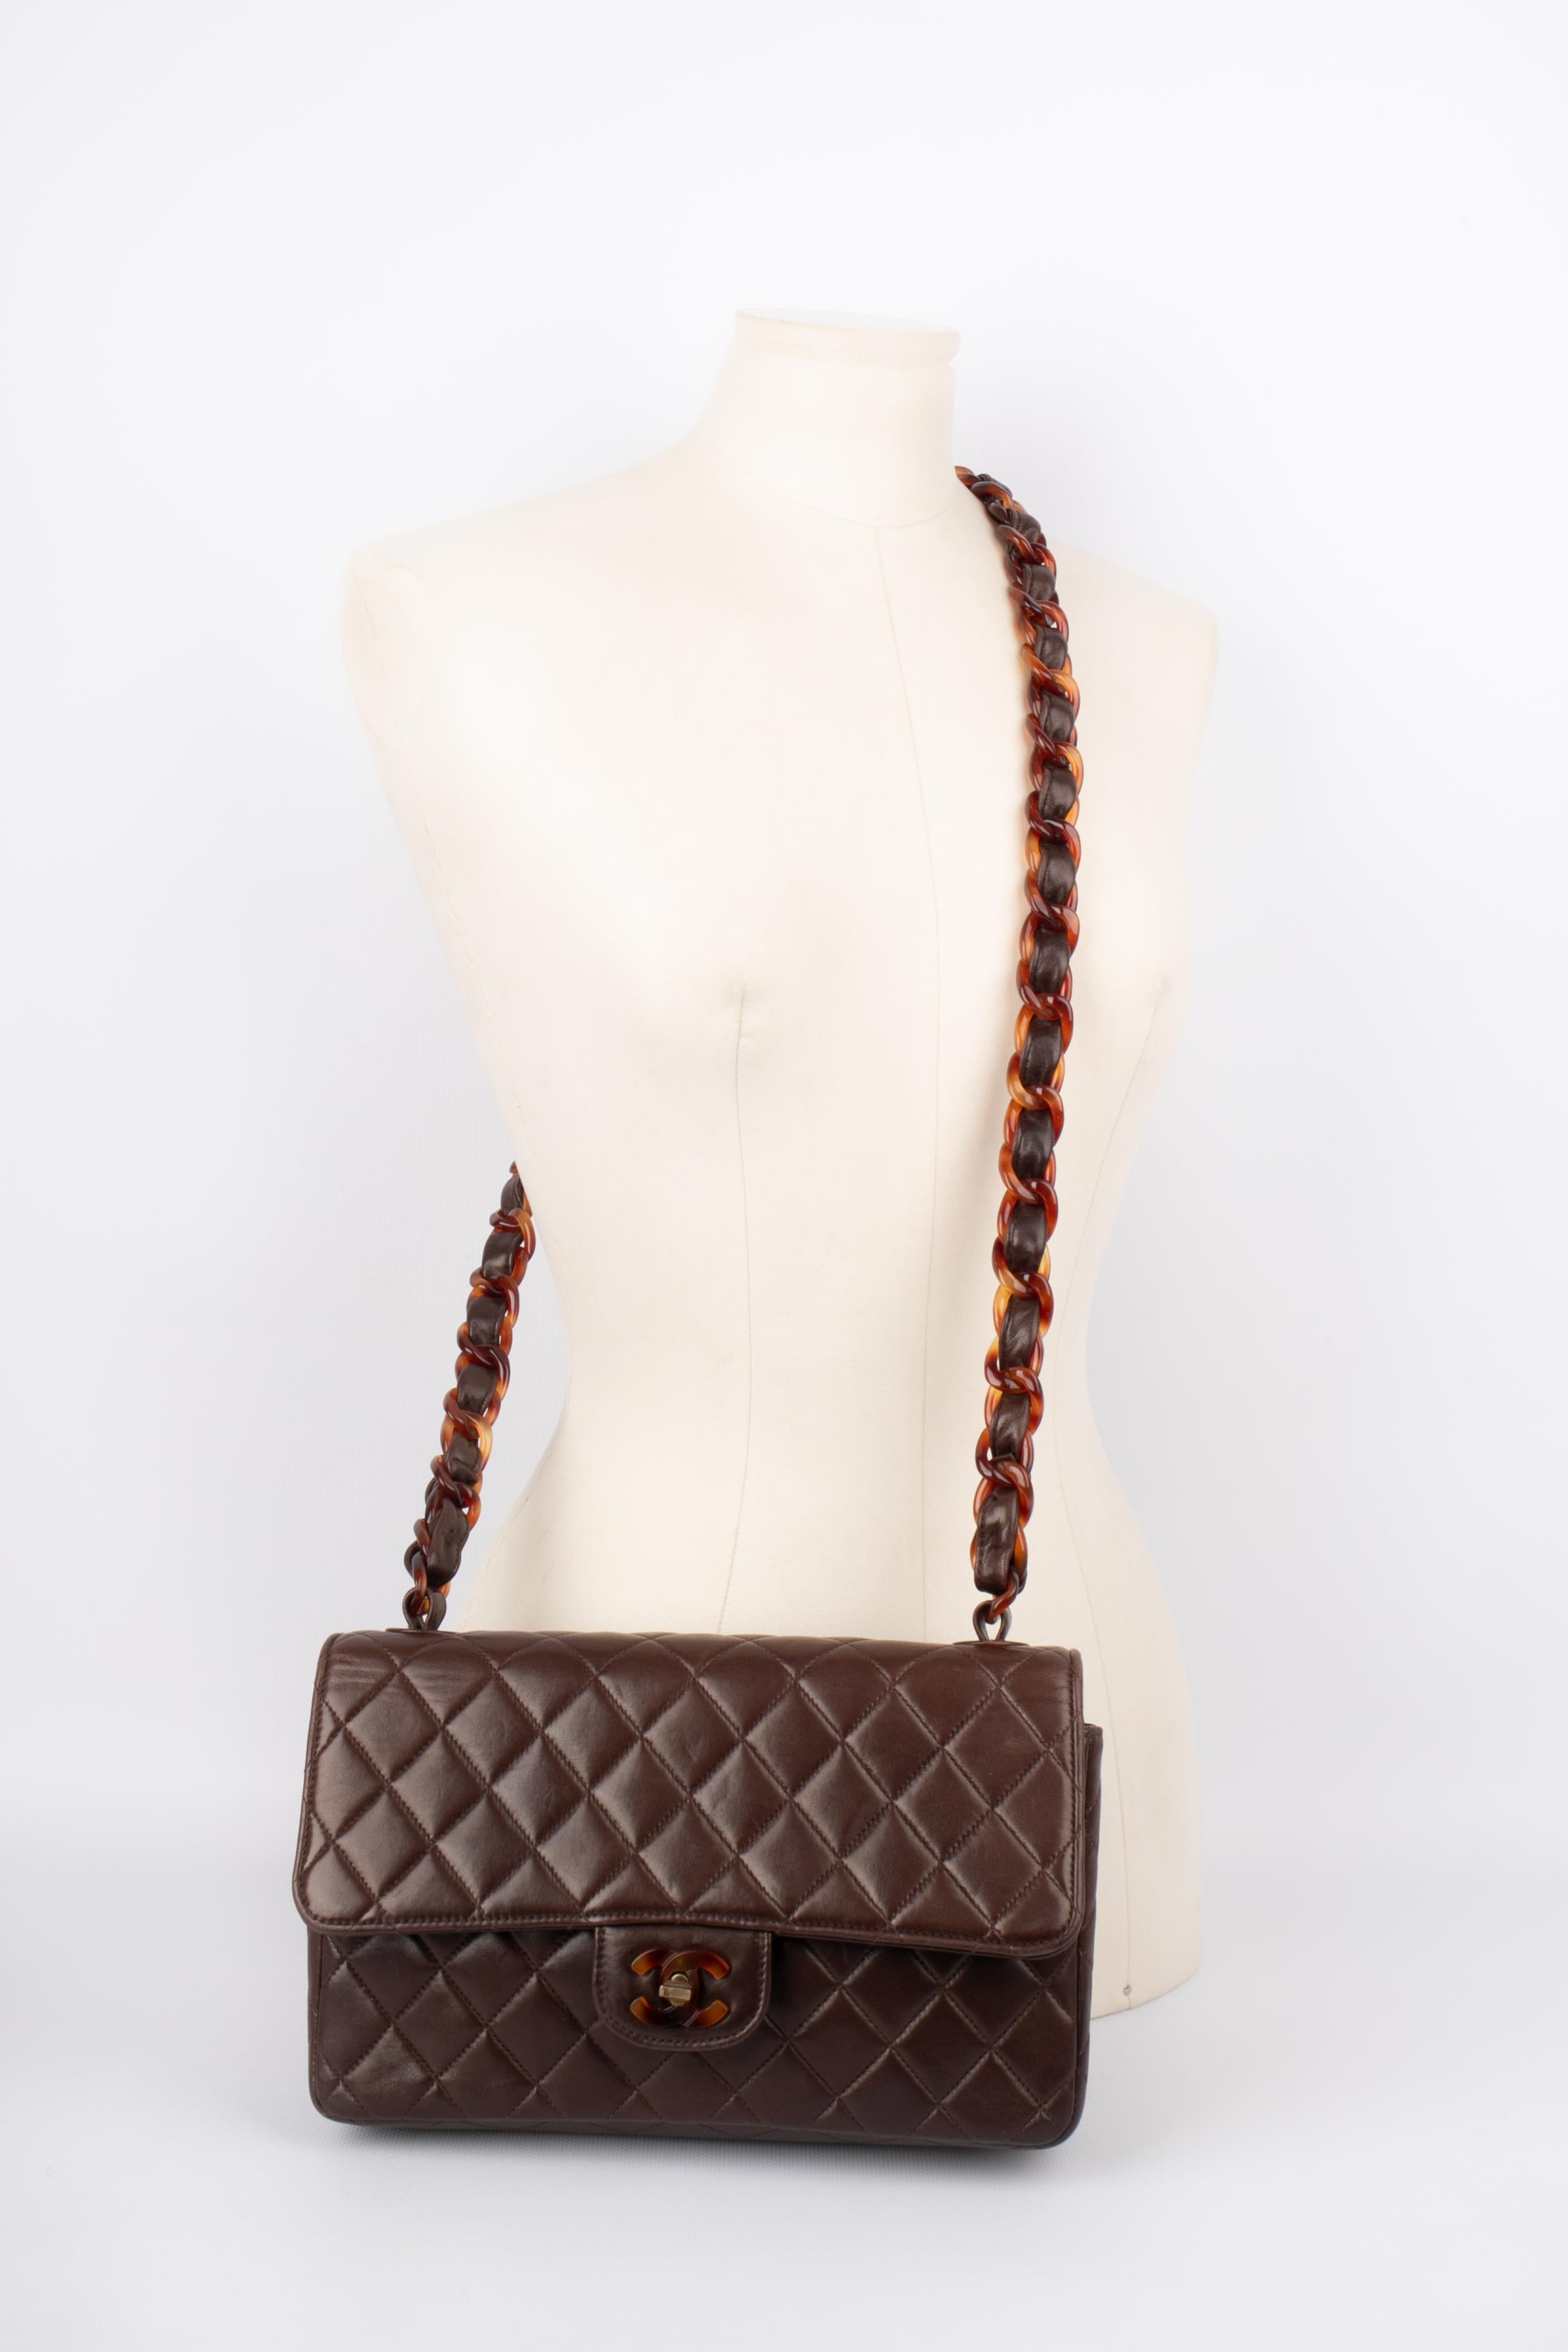 CHANEL - (Made in France) Brown leather quilted handbag. Bakelite clasp and handle. Authenticity card and serial number 3011841.

Condition:
Good condition

Dimensions :
Width: 26 cm - Height: 17 cm - Depth: 7 cm

S143